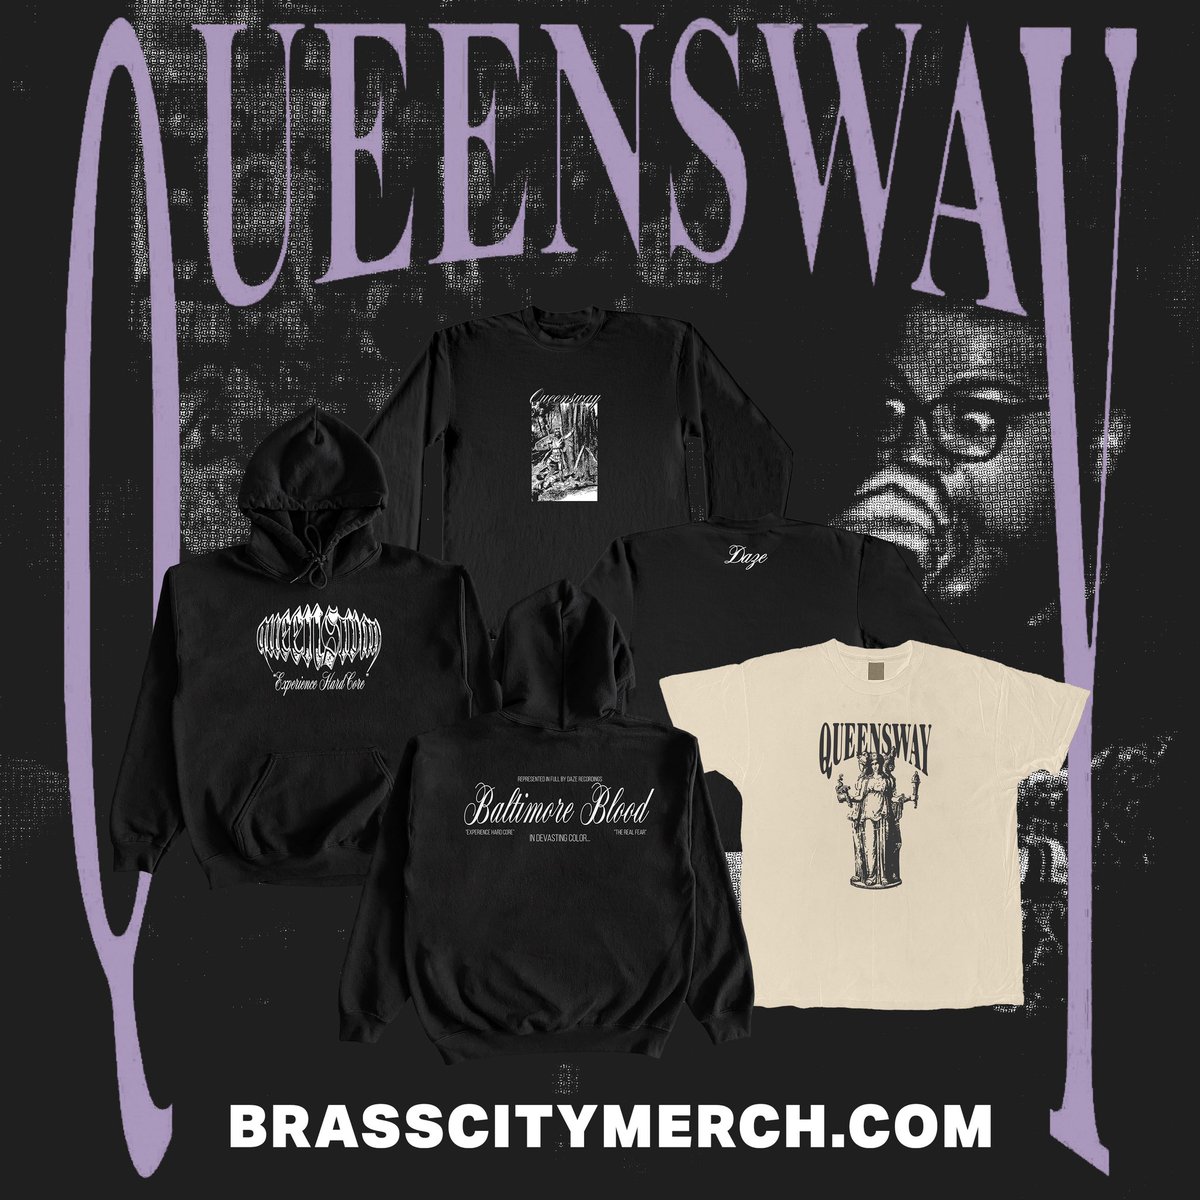 New designs available now from Queensway! Pick something up Brasscitymerch.com